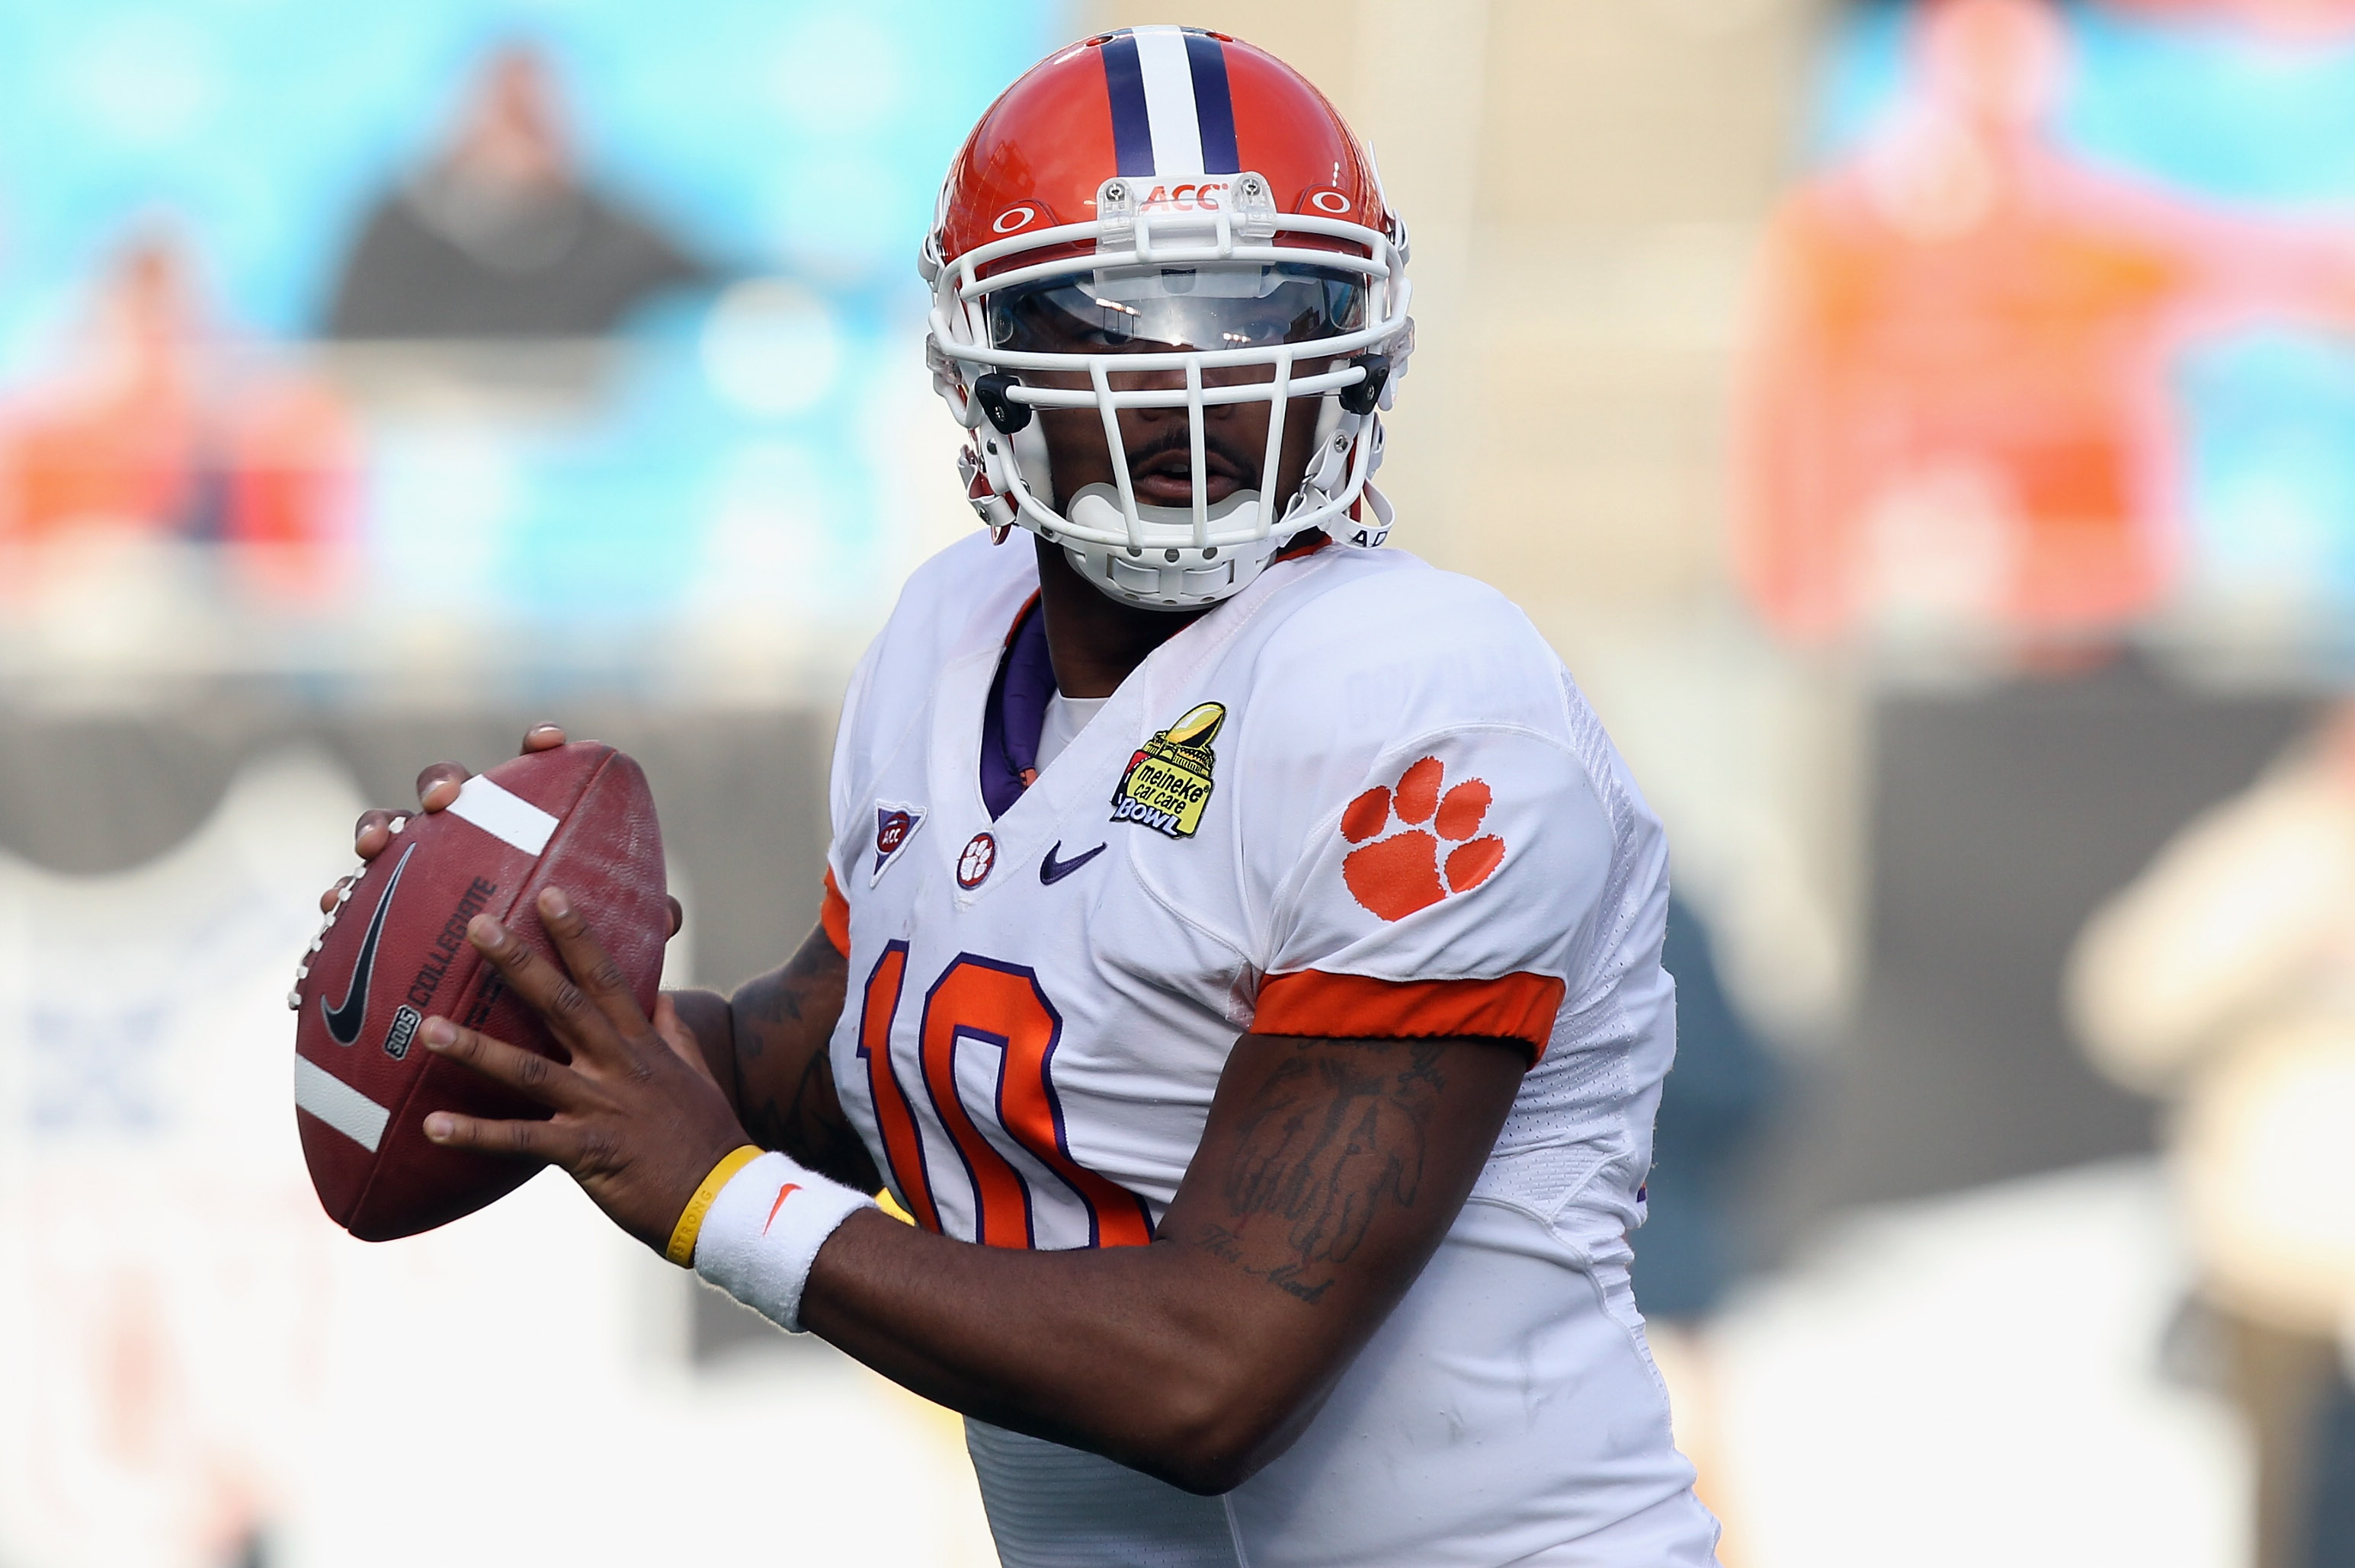 CHARLOTTE, NC - DECEMBER 31:  Tajh Boyd #10 of the Clemson Tigers drops back to pass against the USF Bulls during their game at Bank of America Stadium on December 31, 2010 in Charlotte, North Carolina.  (Photo by Streeter Lecka/Getty Images)